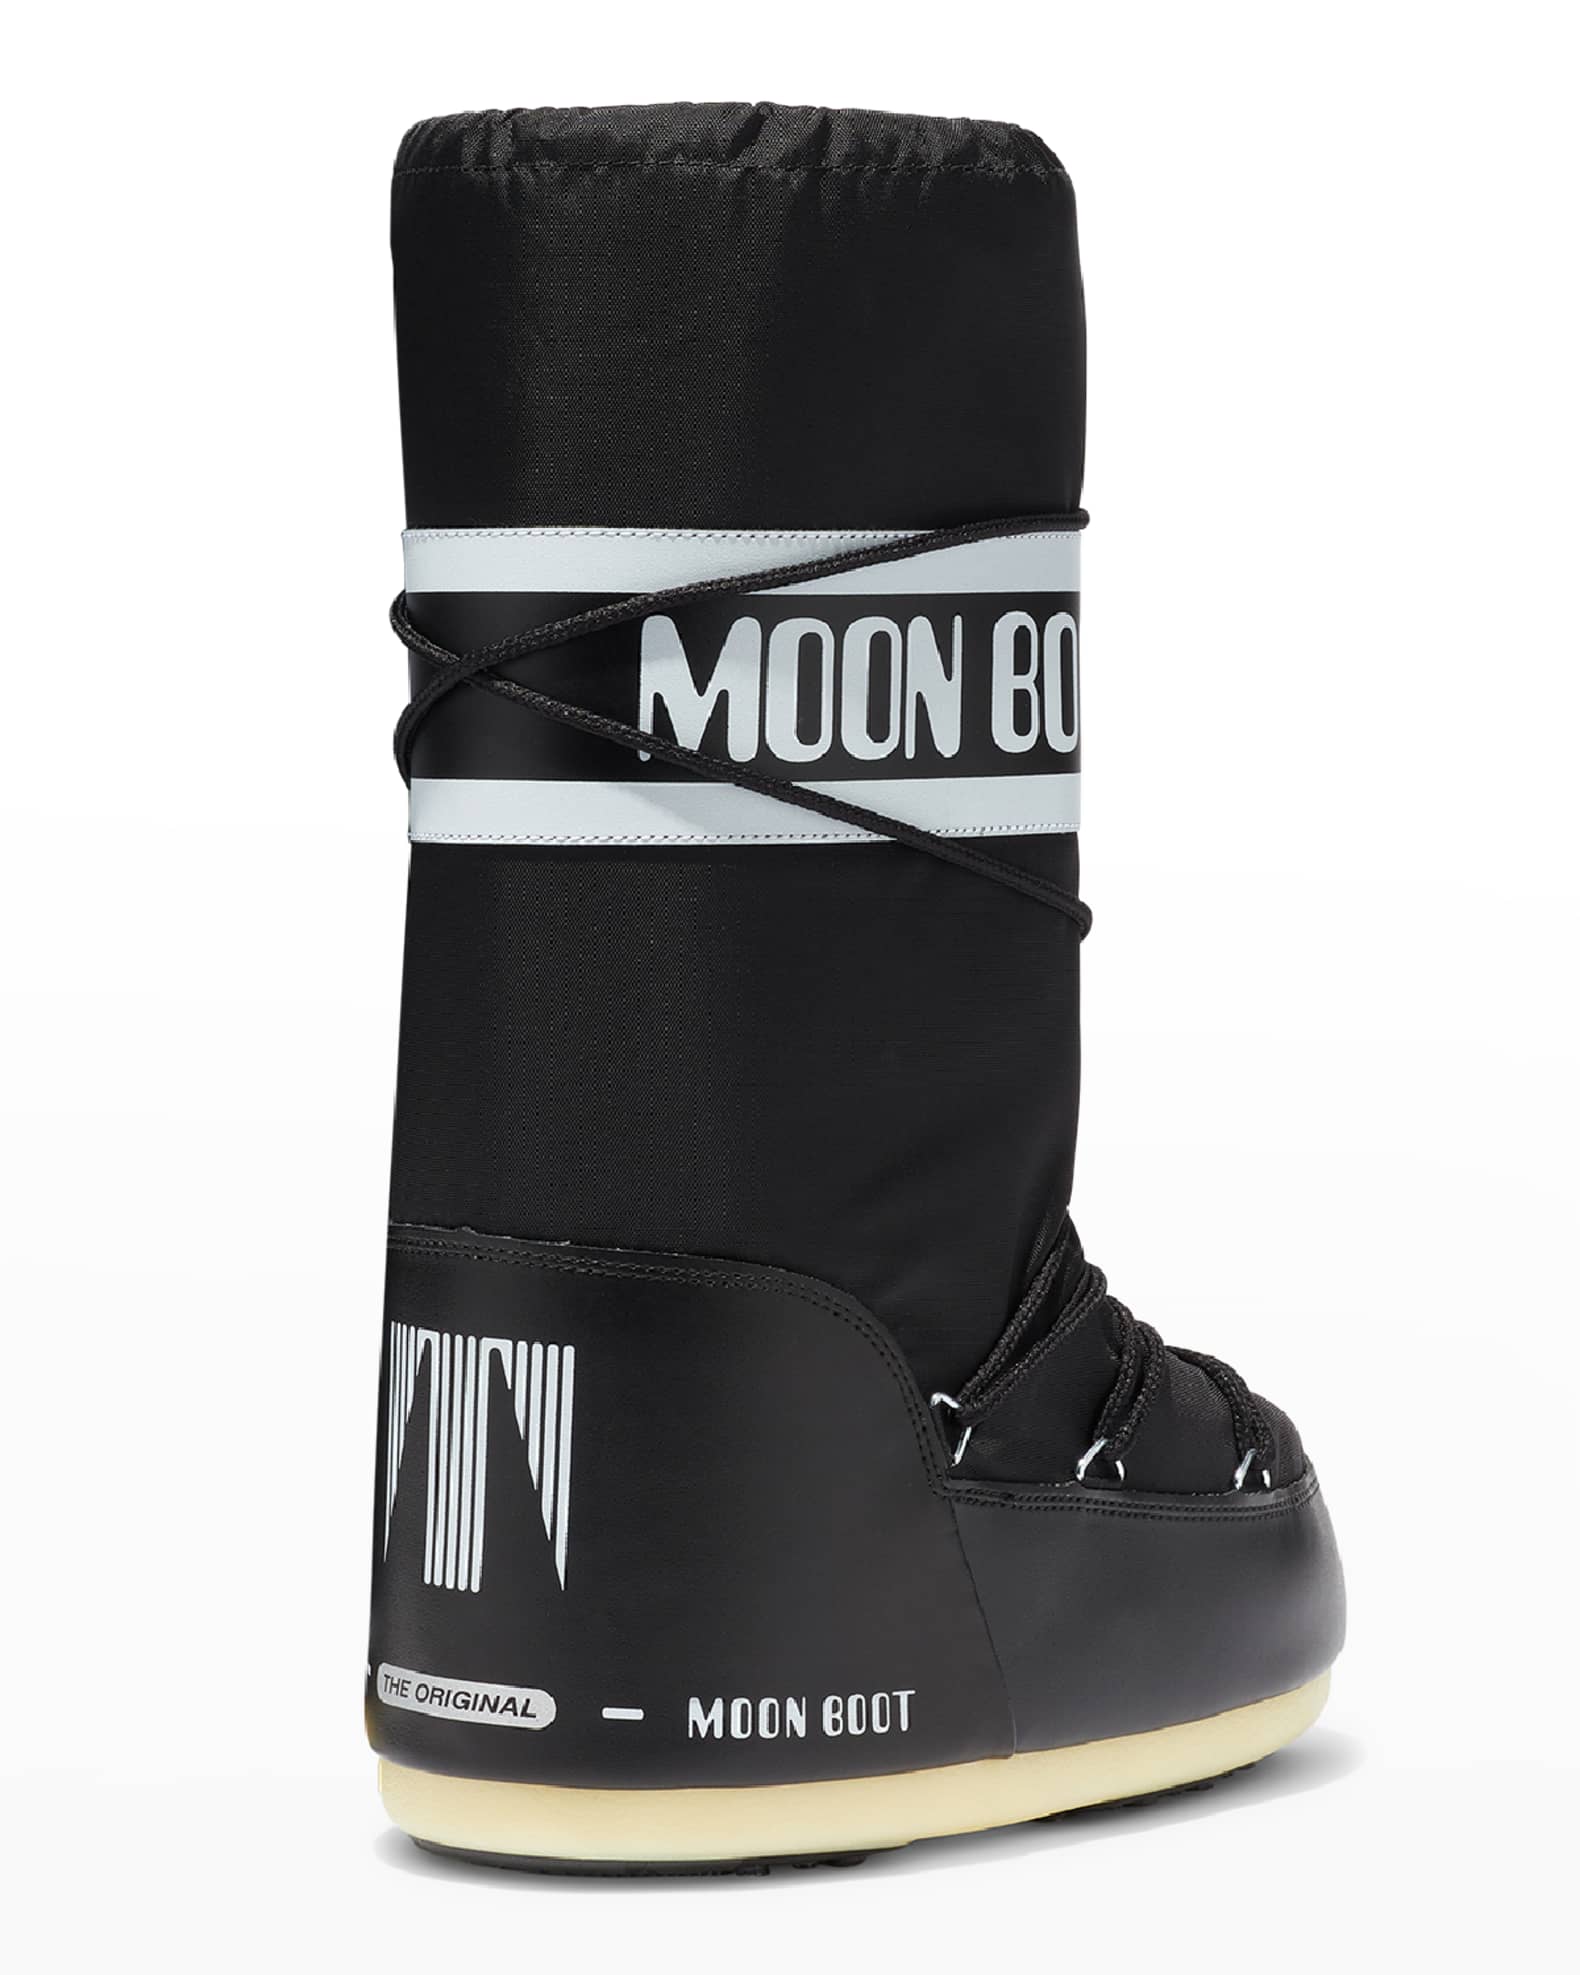 Moon Boot - Black Short Lace-Up Snow Boots